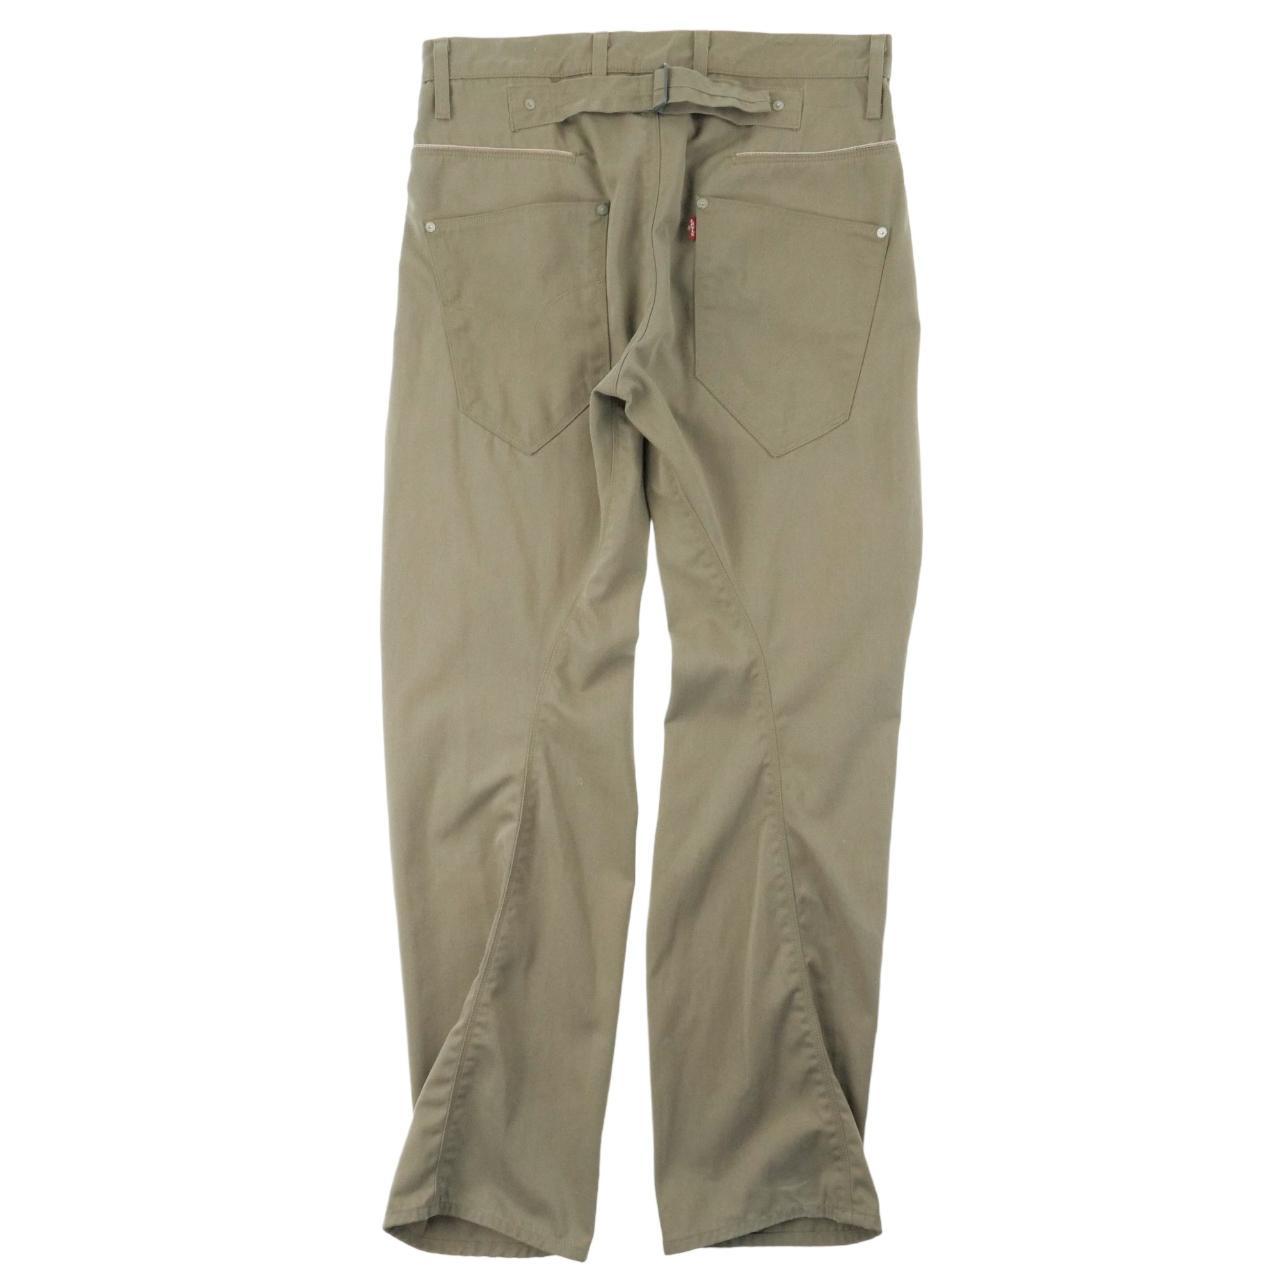 Buy Brown Trousers & Pants for Men by LEVIS Online | Ajio.com